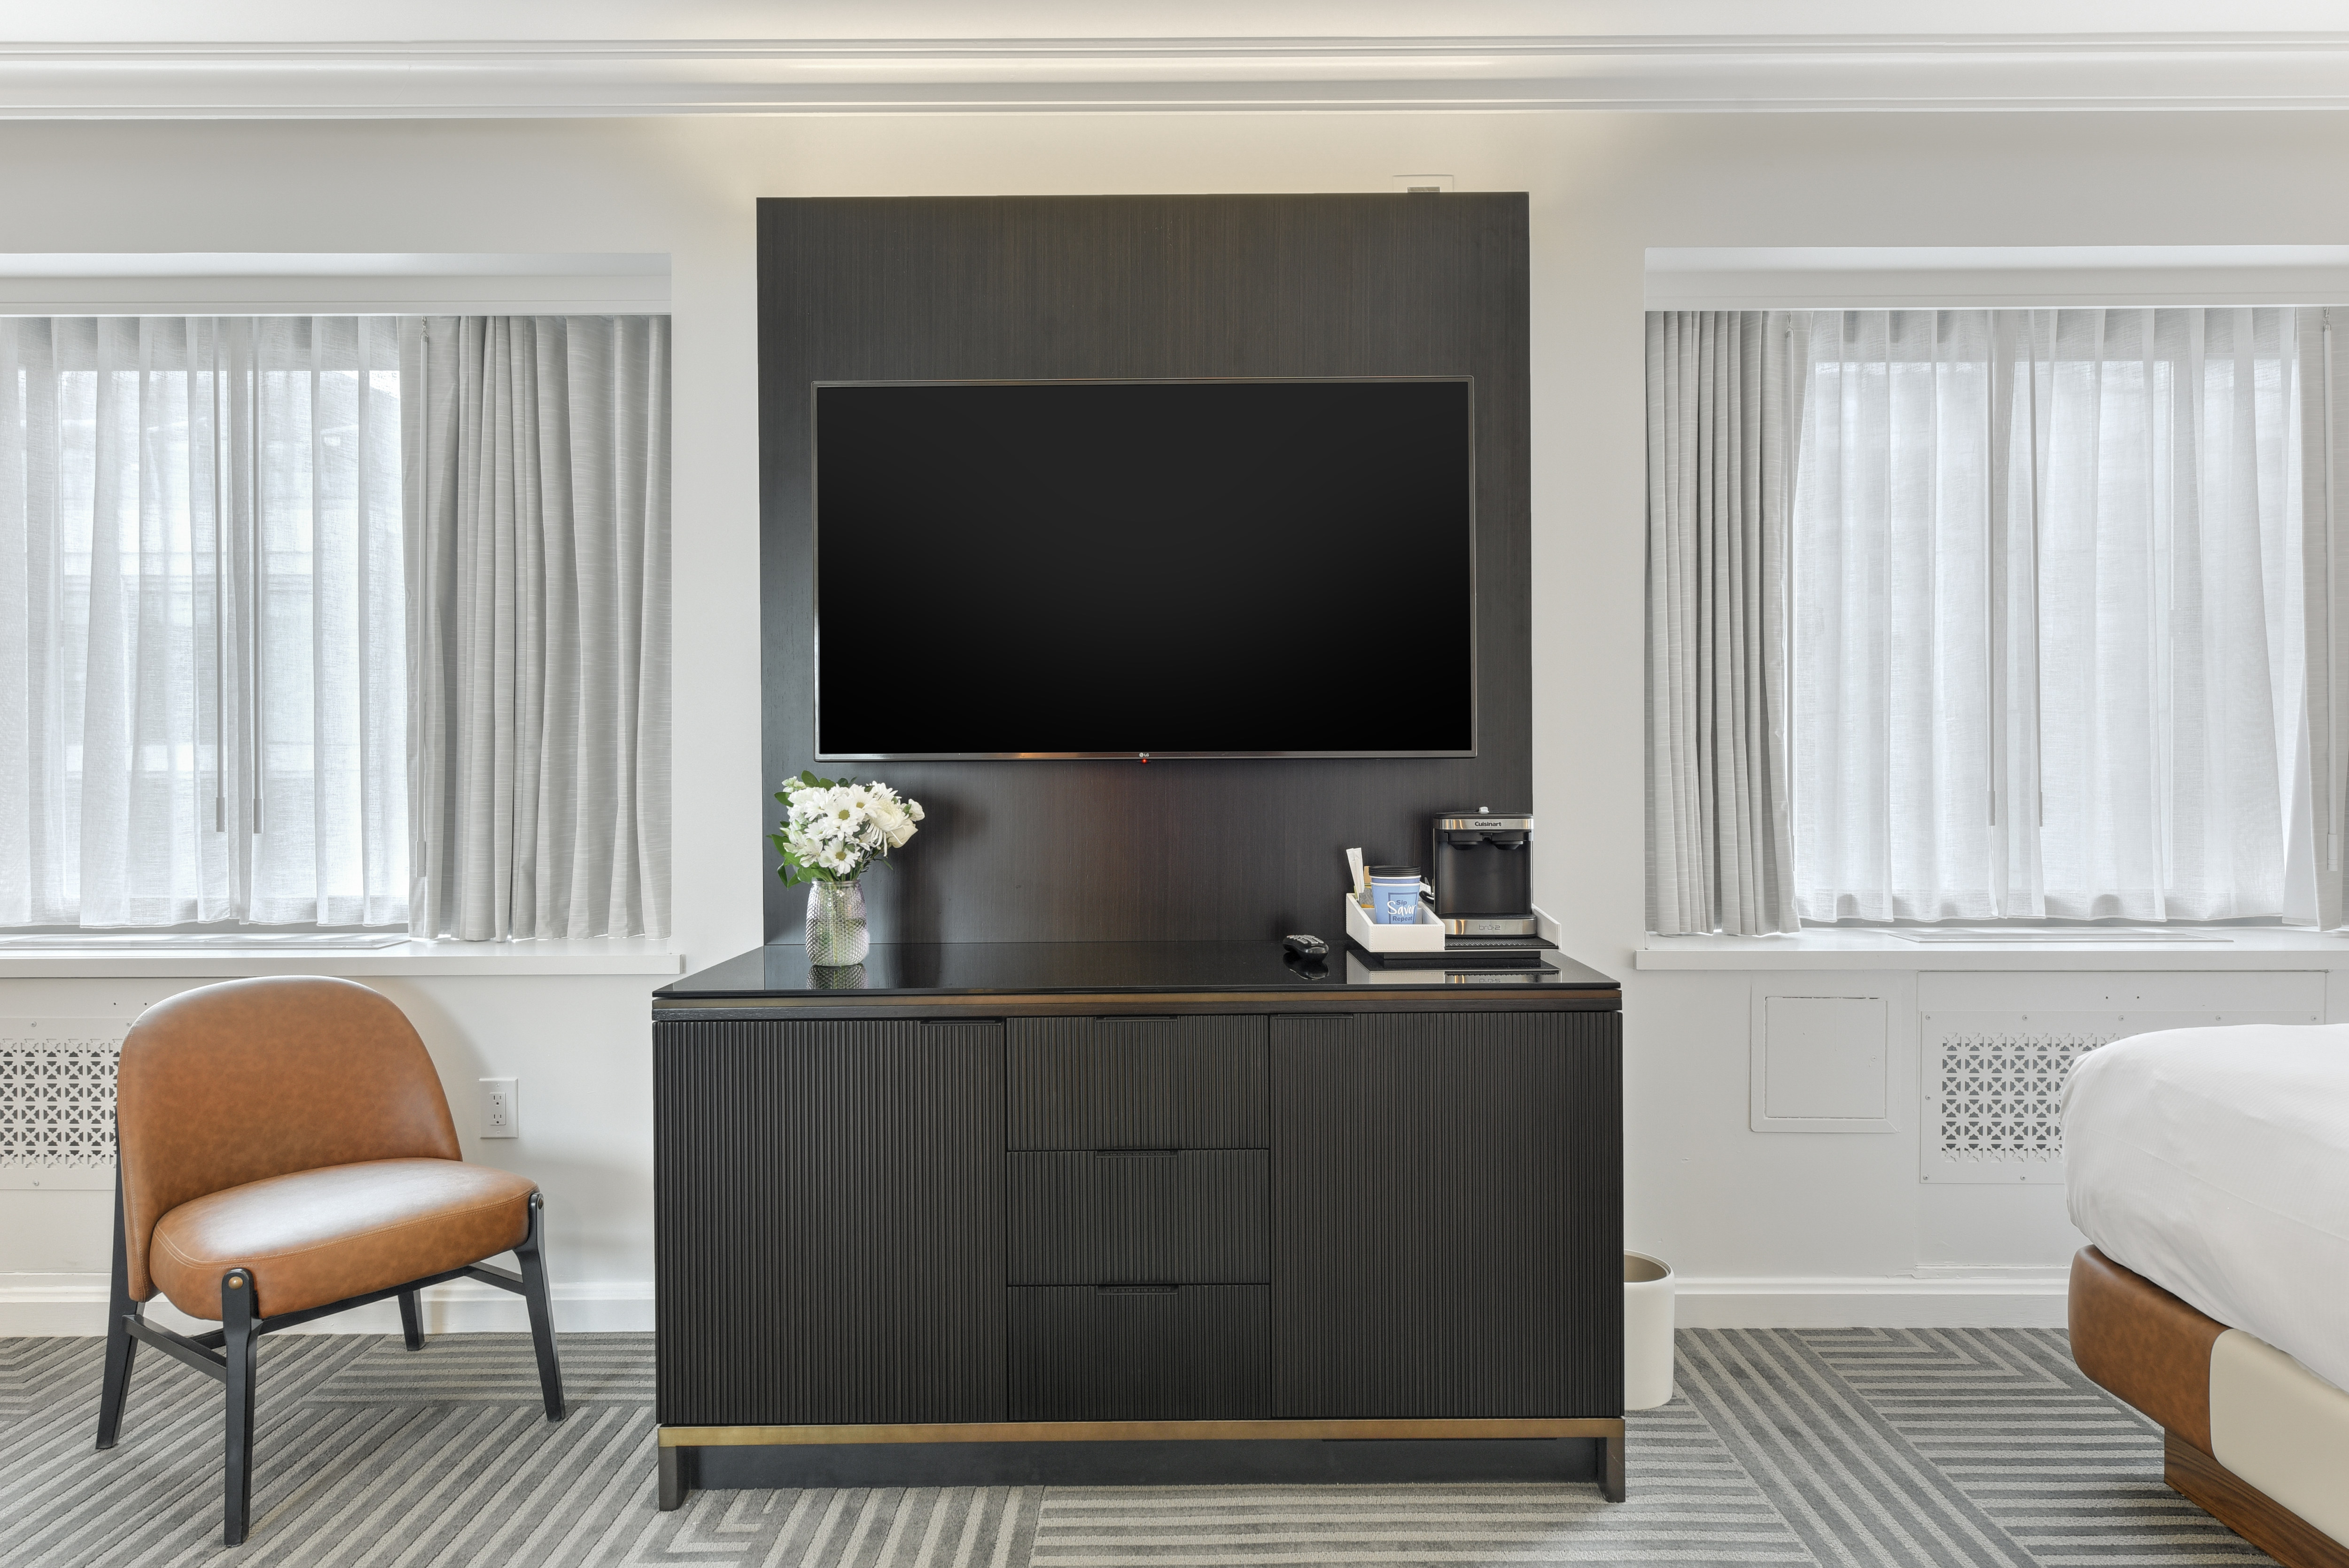 HDTV, Chair and Amenities in a Guest Room